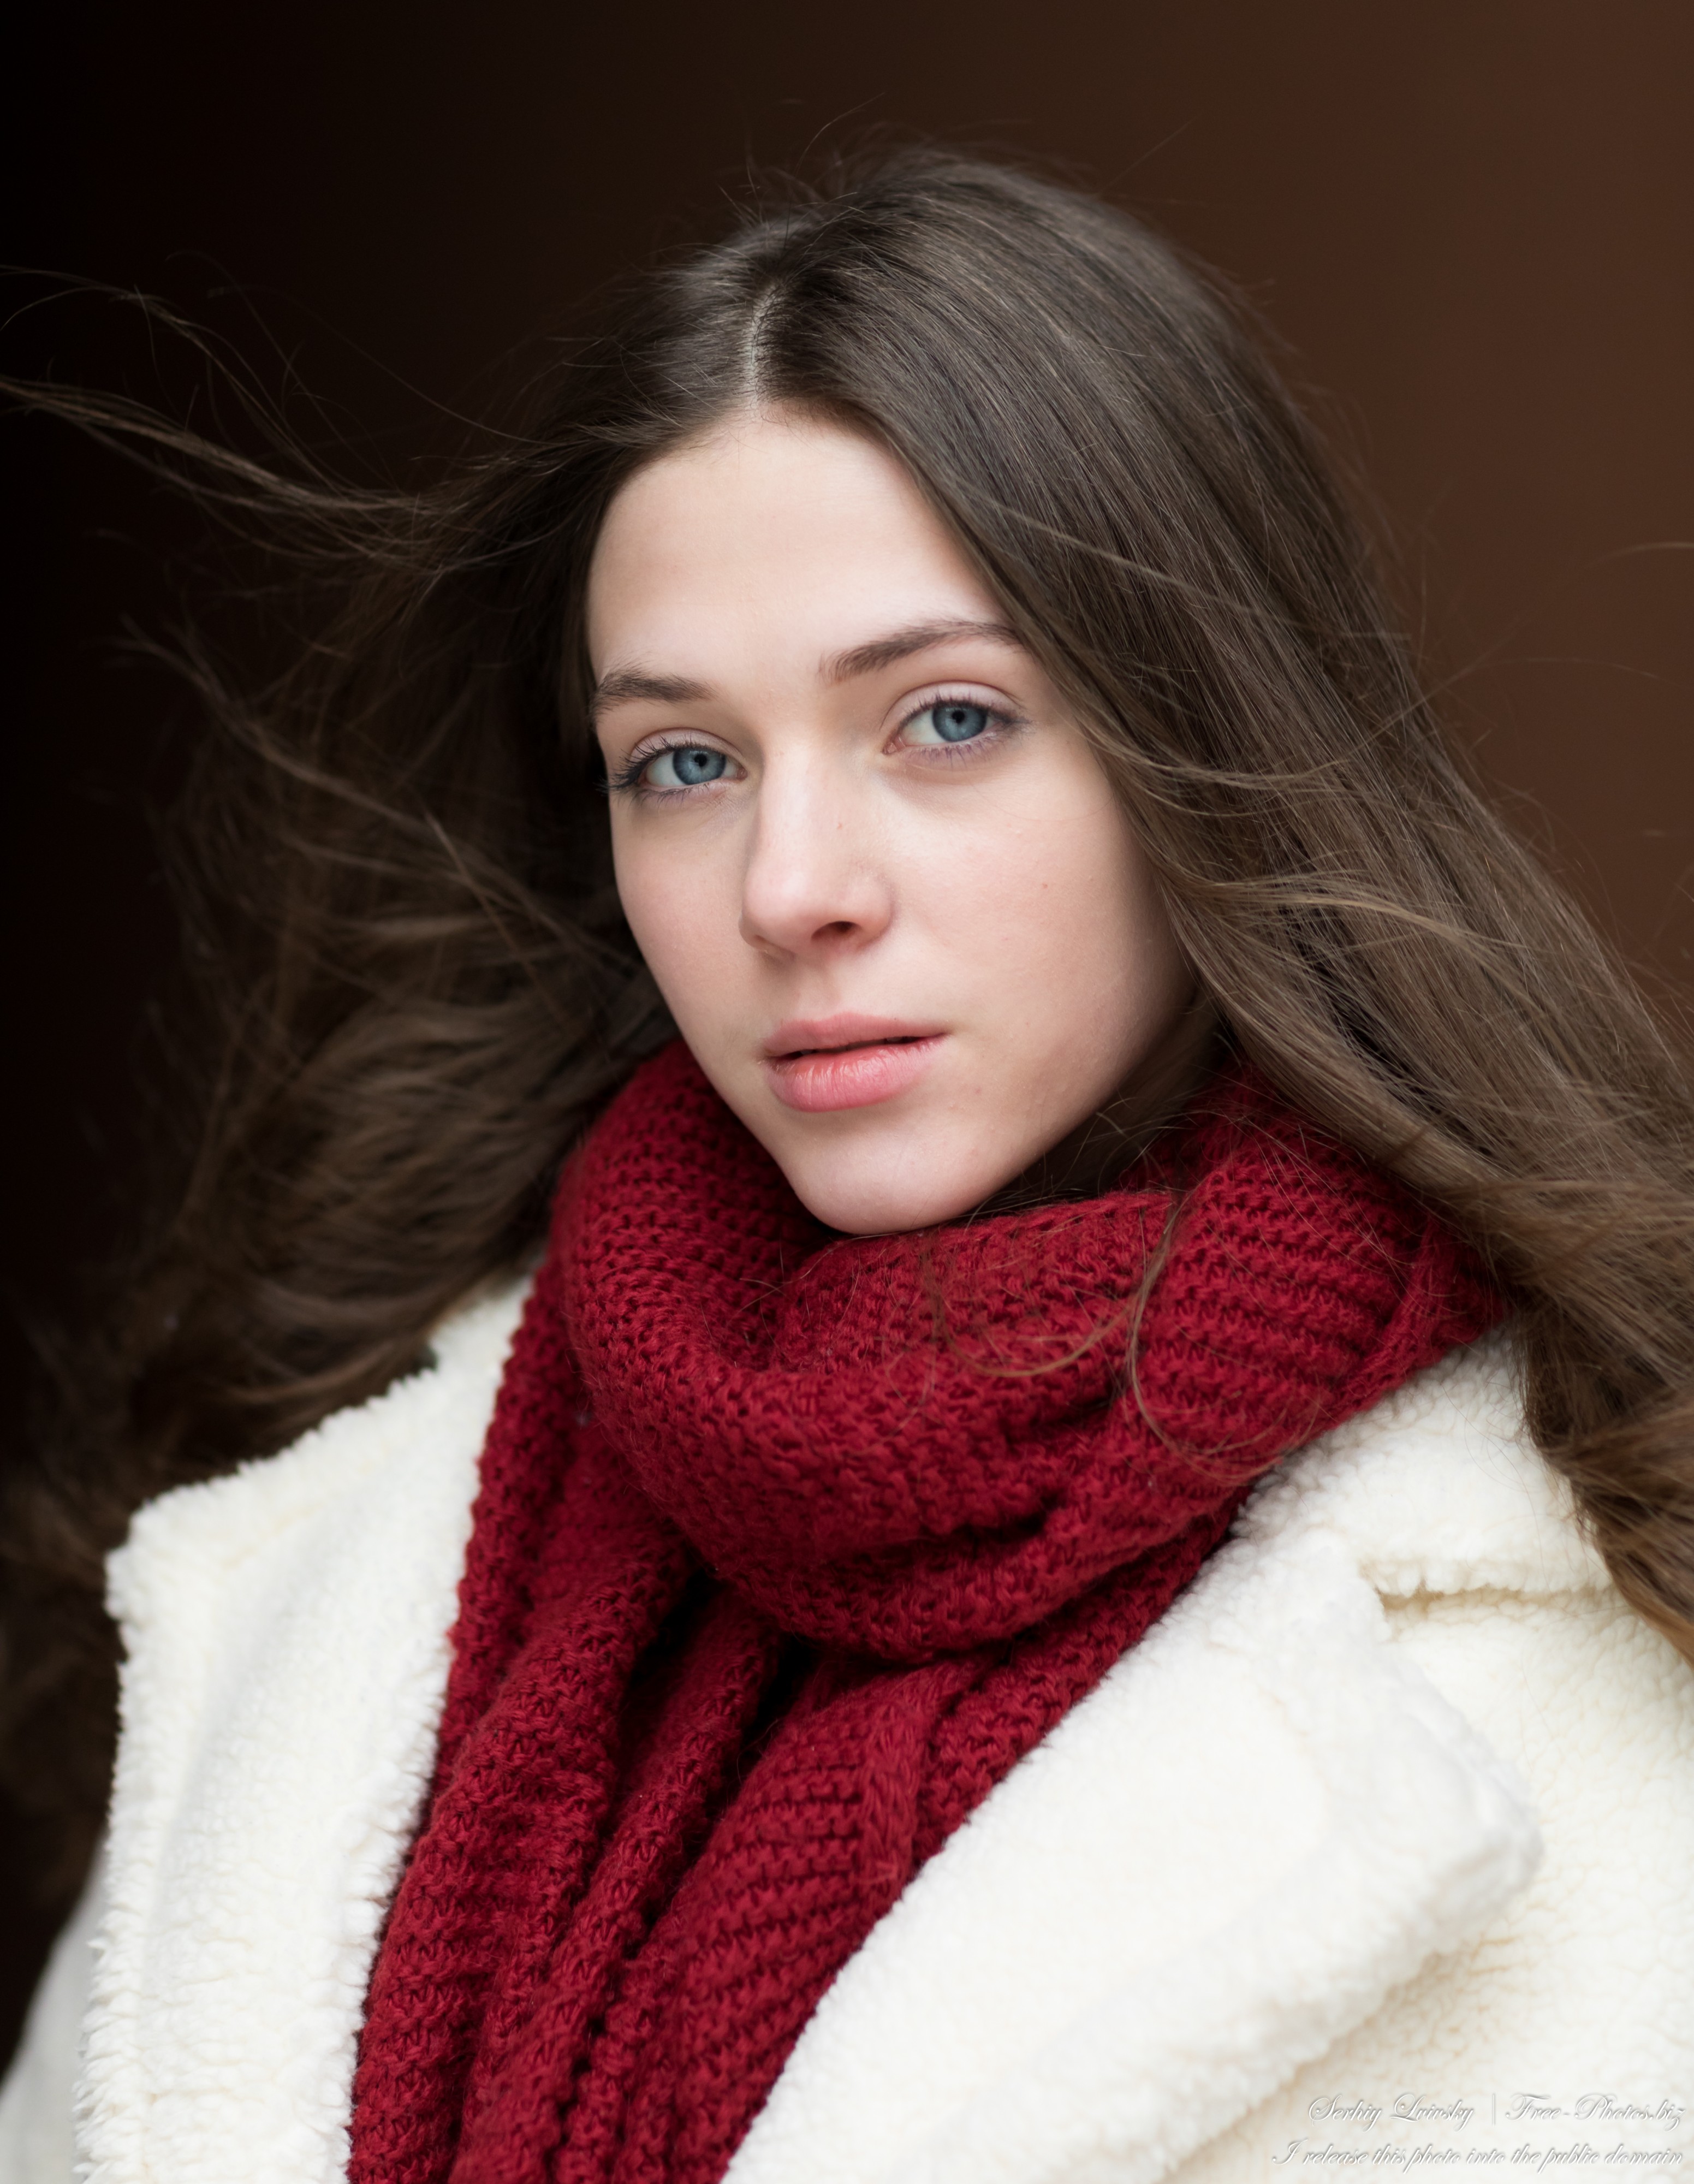 Sophia - a 17-year-old girl with blue eyes photographed by Serhiy Lvivsky in January 2022, picture 5